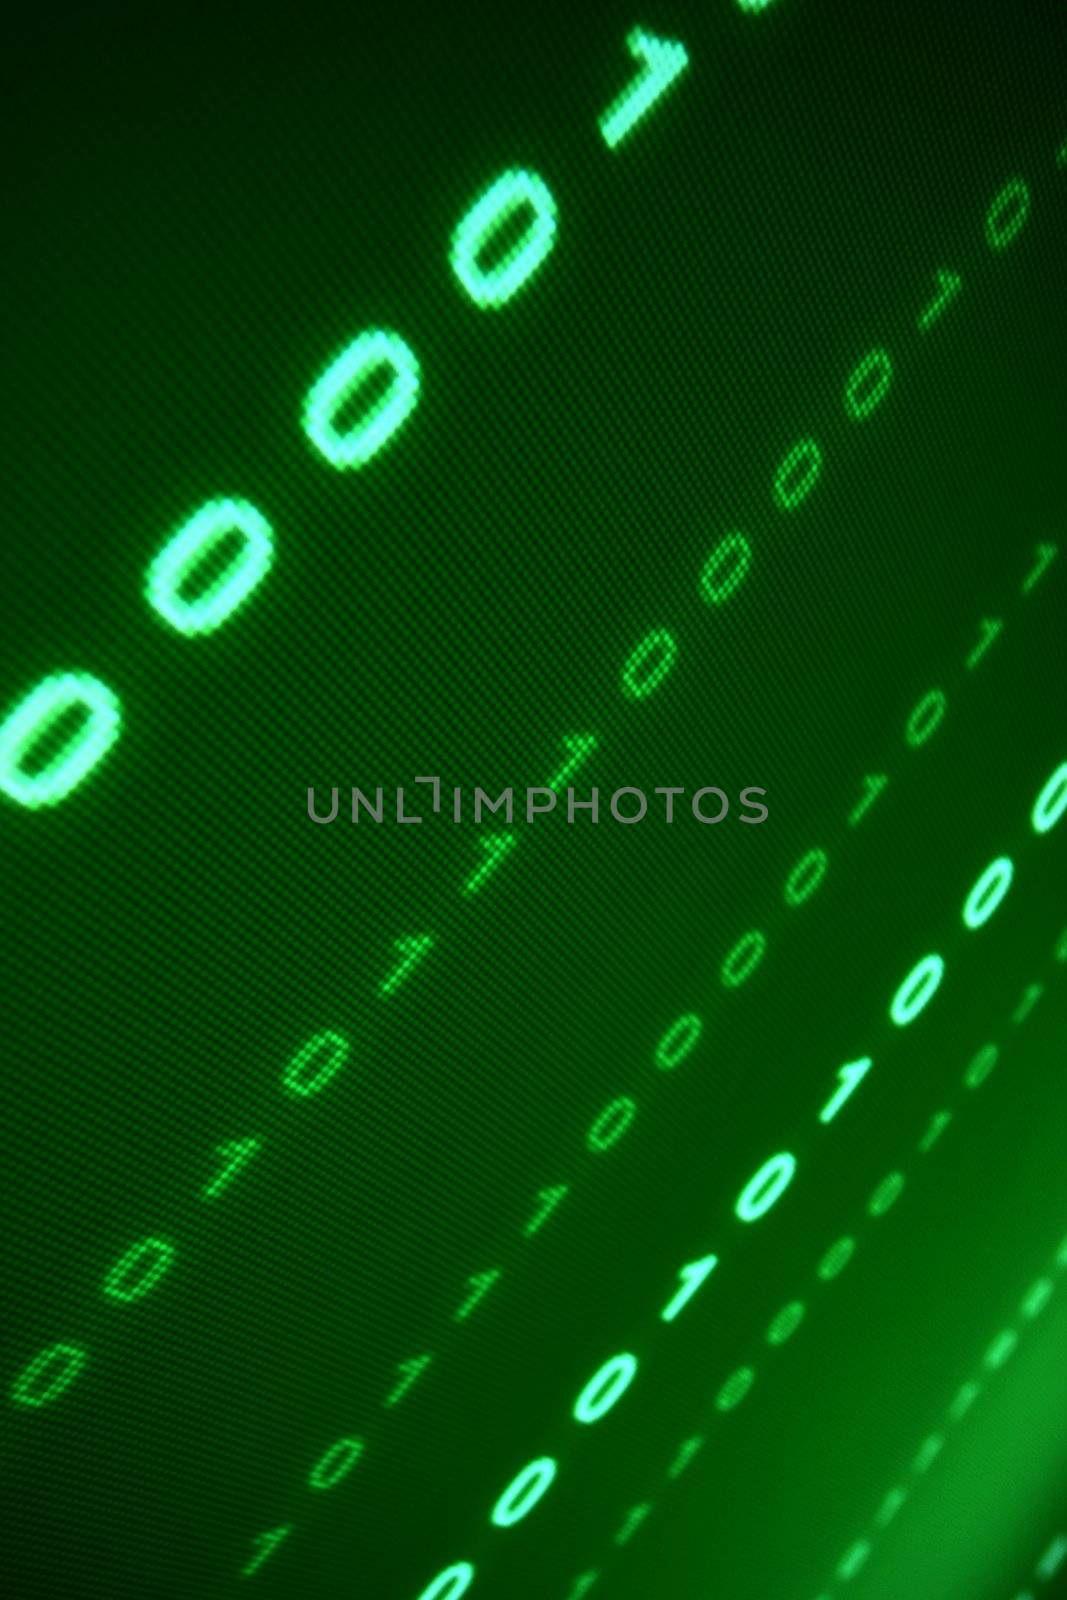 green data space abstract background